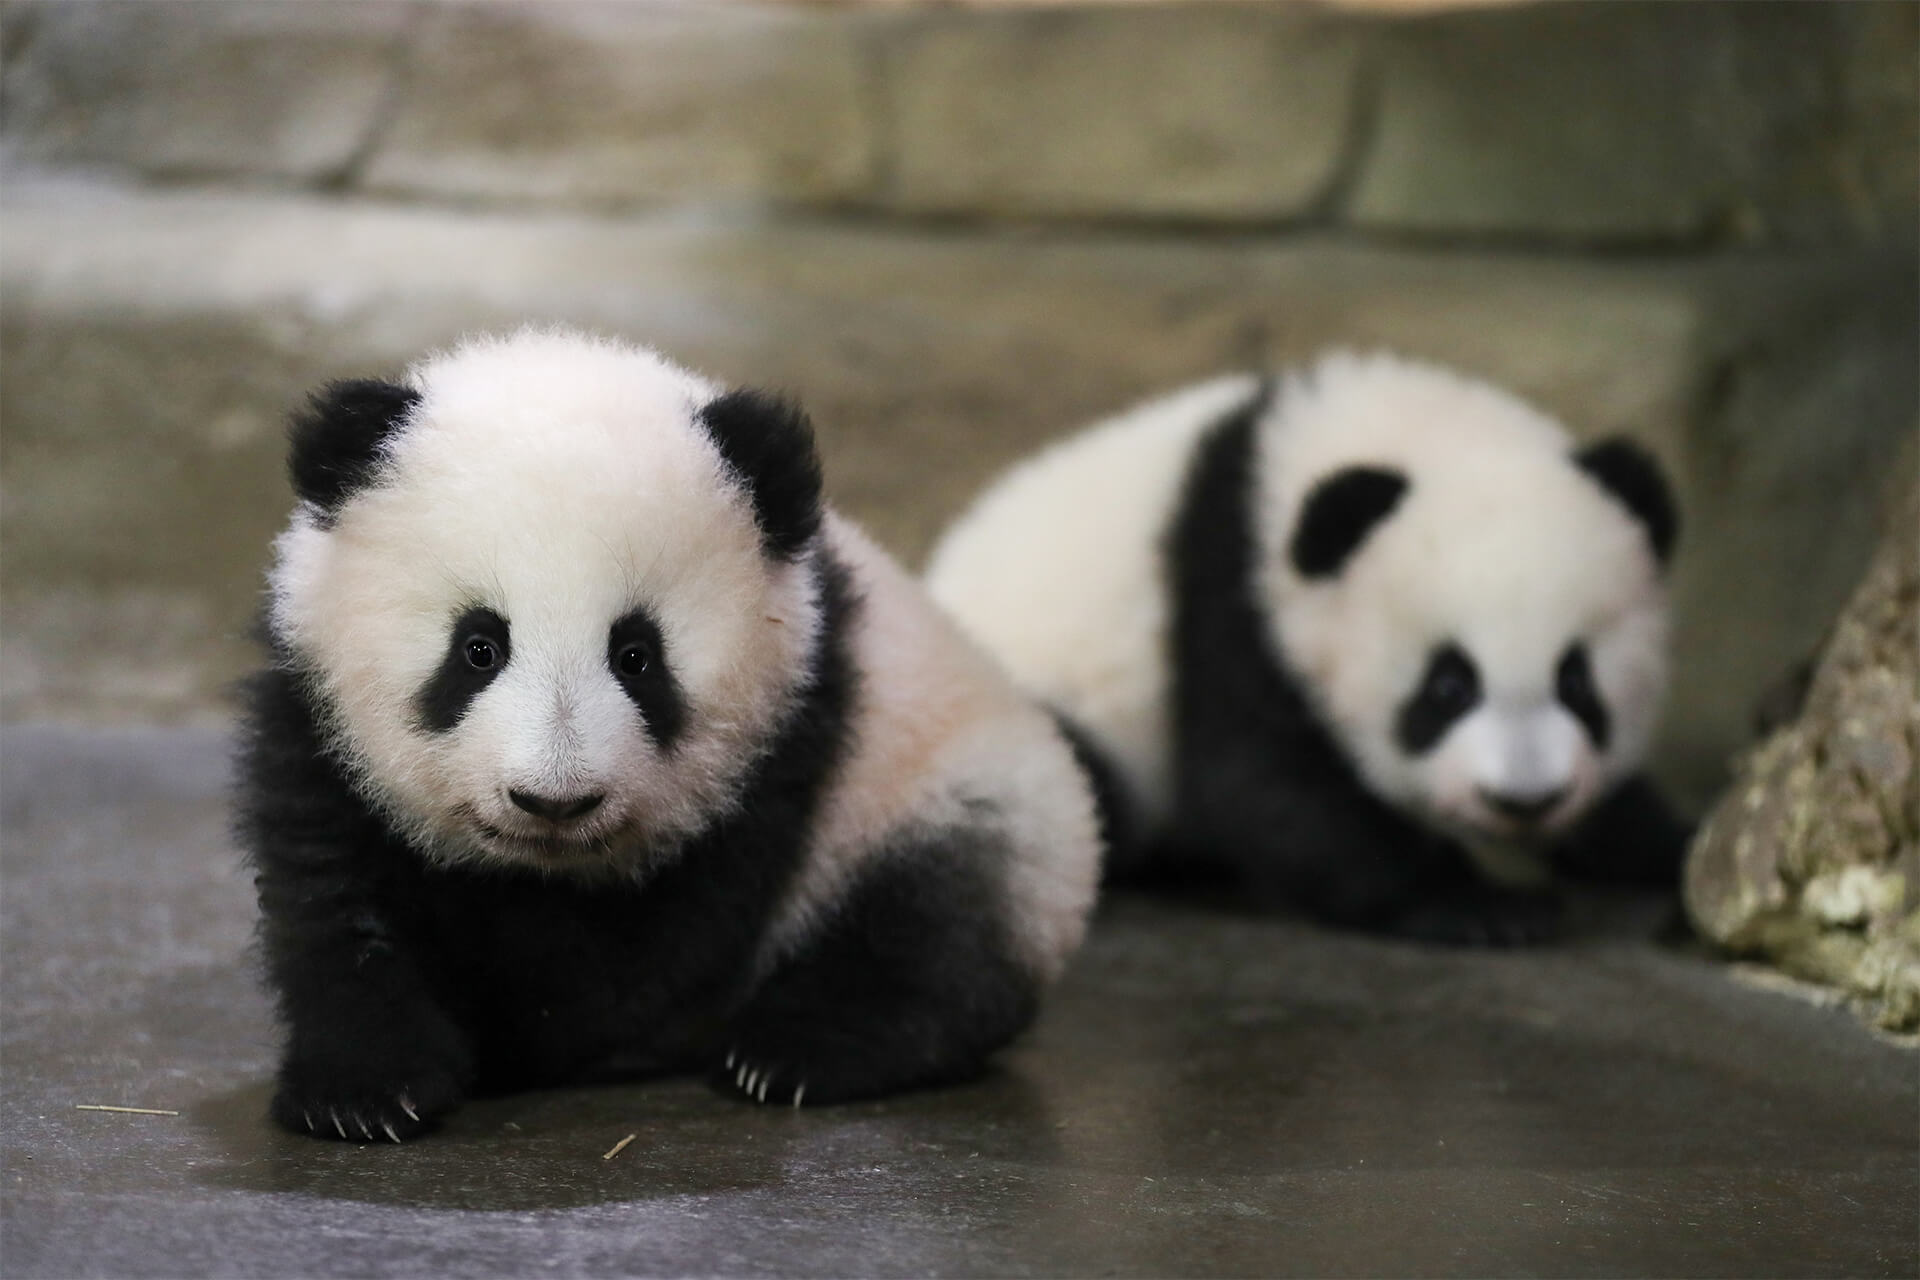 In this photo provided by Zooparc de Beauval, twin panda cubs, Yuandudu and Huanlili take their first steps in public, at the Beauval Zoo in Saint-Aignan-sur-Cher, France, Saturday, Dec. 11, 2021. The female twins were born in August. Their mother, Huan Huan, and father, Yuan Zi, are at the Beauval Zoo, south of Paris, on a 10-year loan from China aimed at highlighting good ties with France. (Zooparc de Beauval via AP)